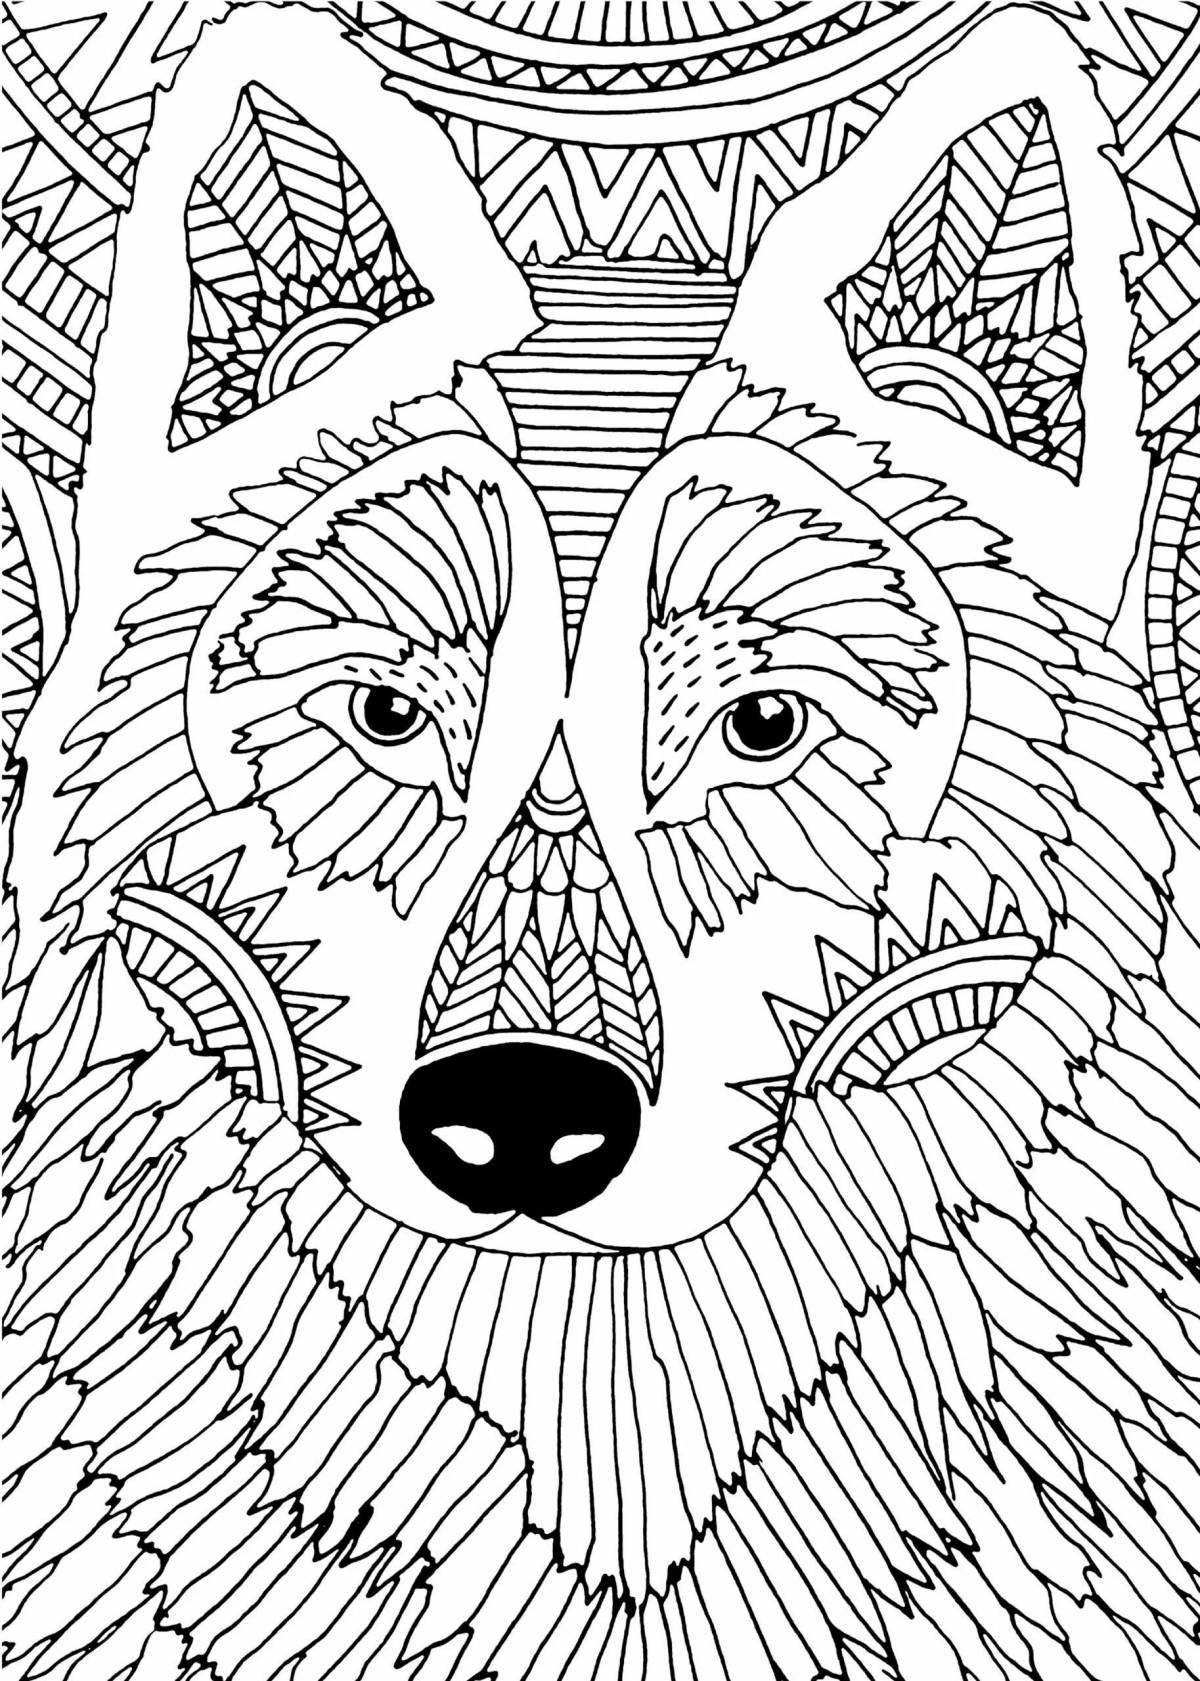 Bright coloring art therapy for adults